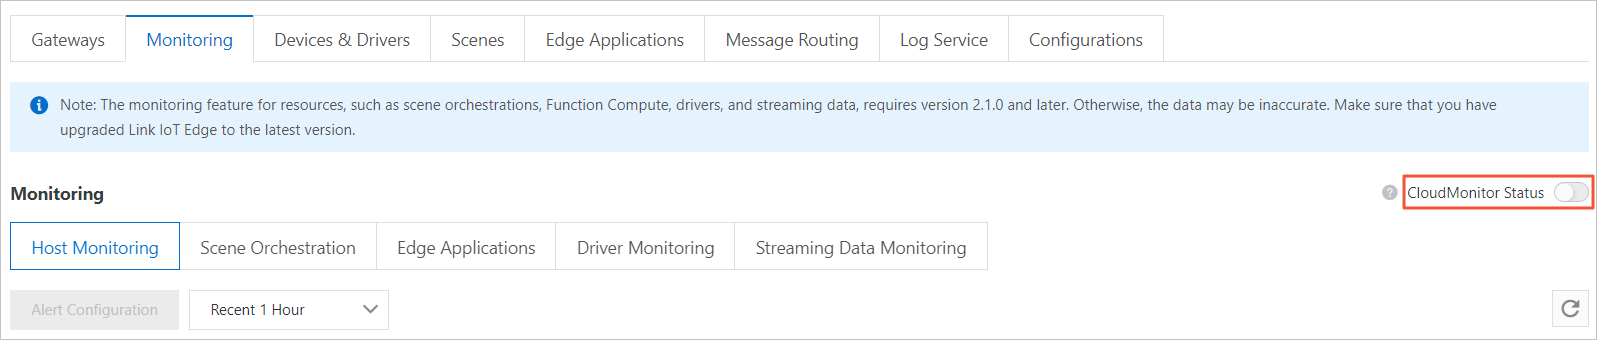 Turn on the CloudMonitor Status switch